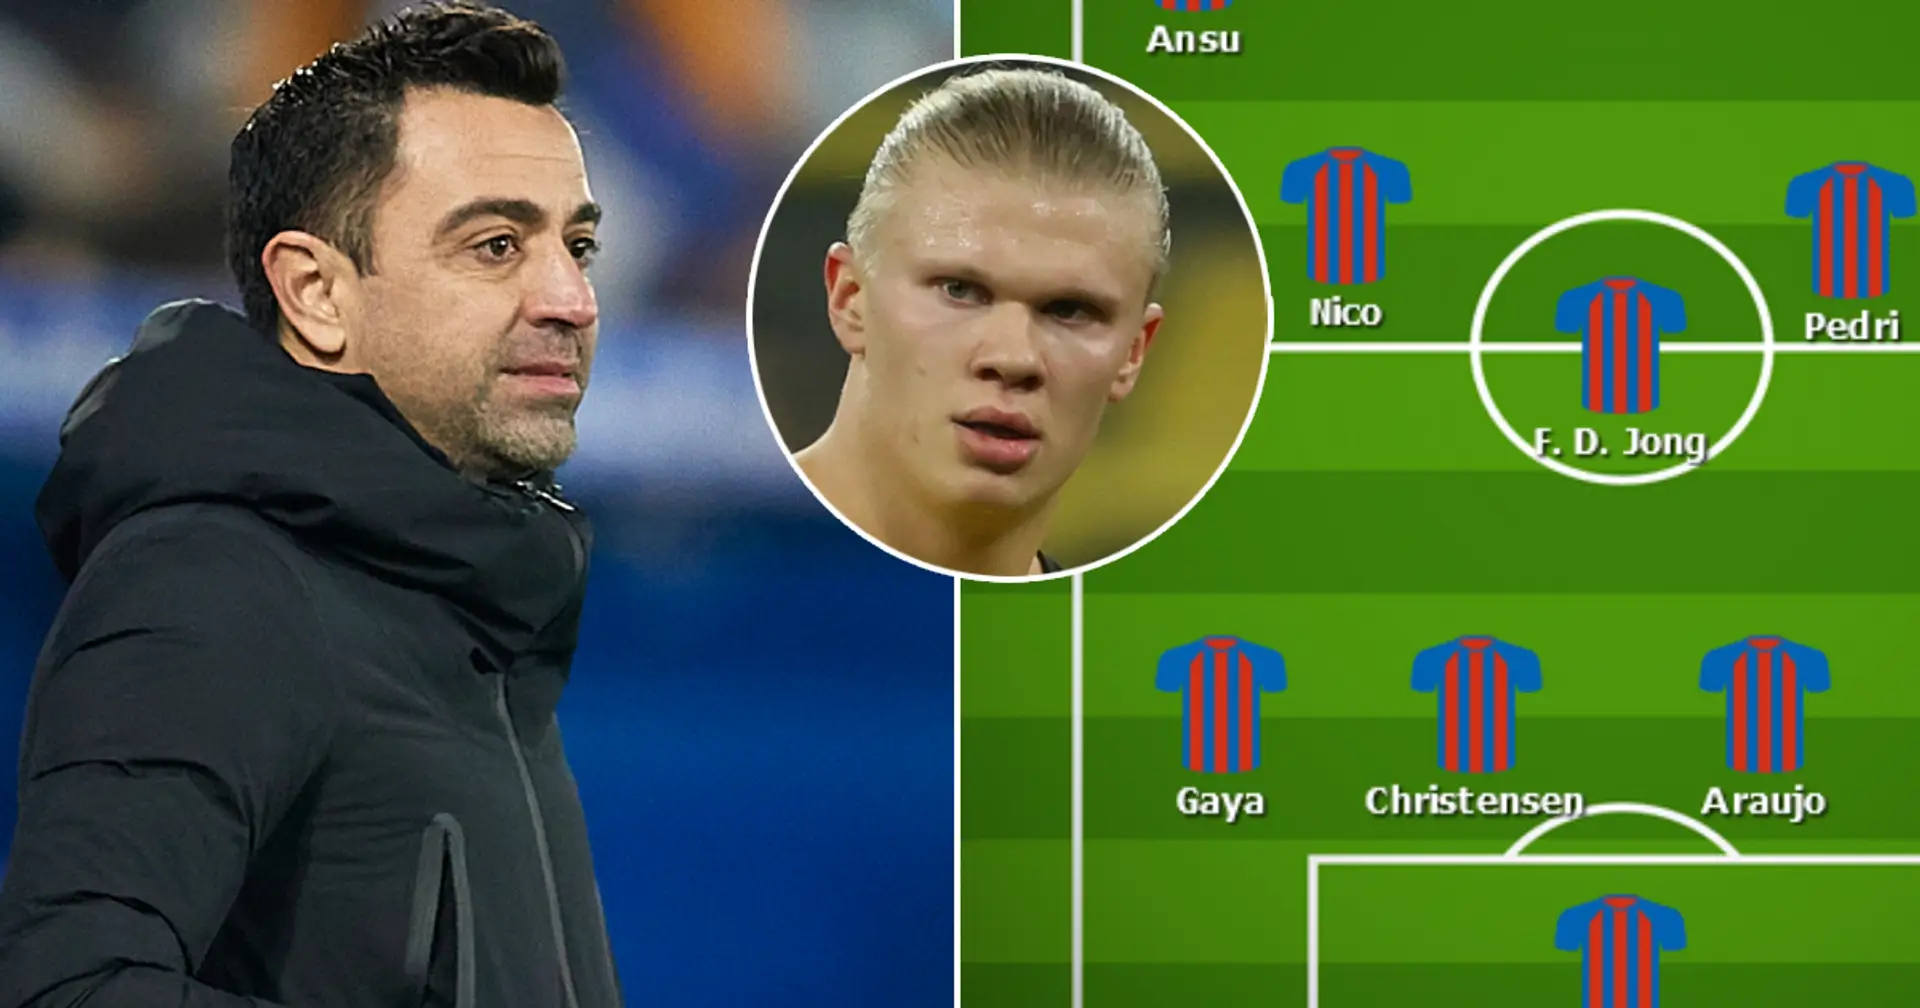 Haaland in, 2 veterans out: What Xavi's dream XI could like next season